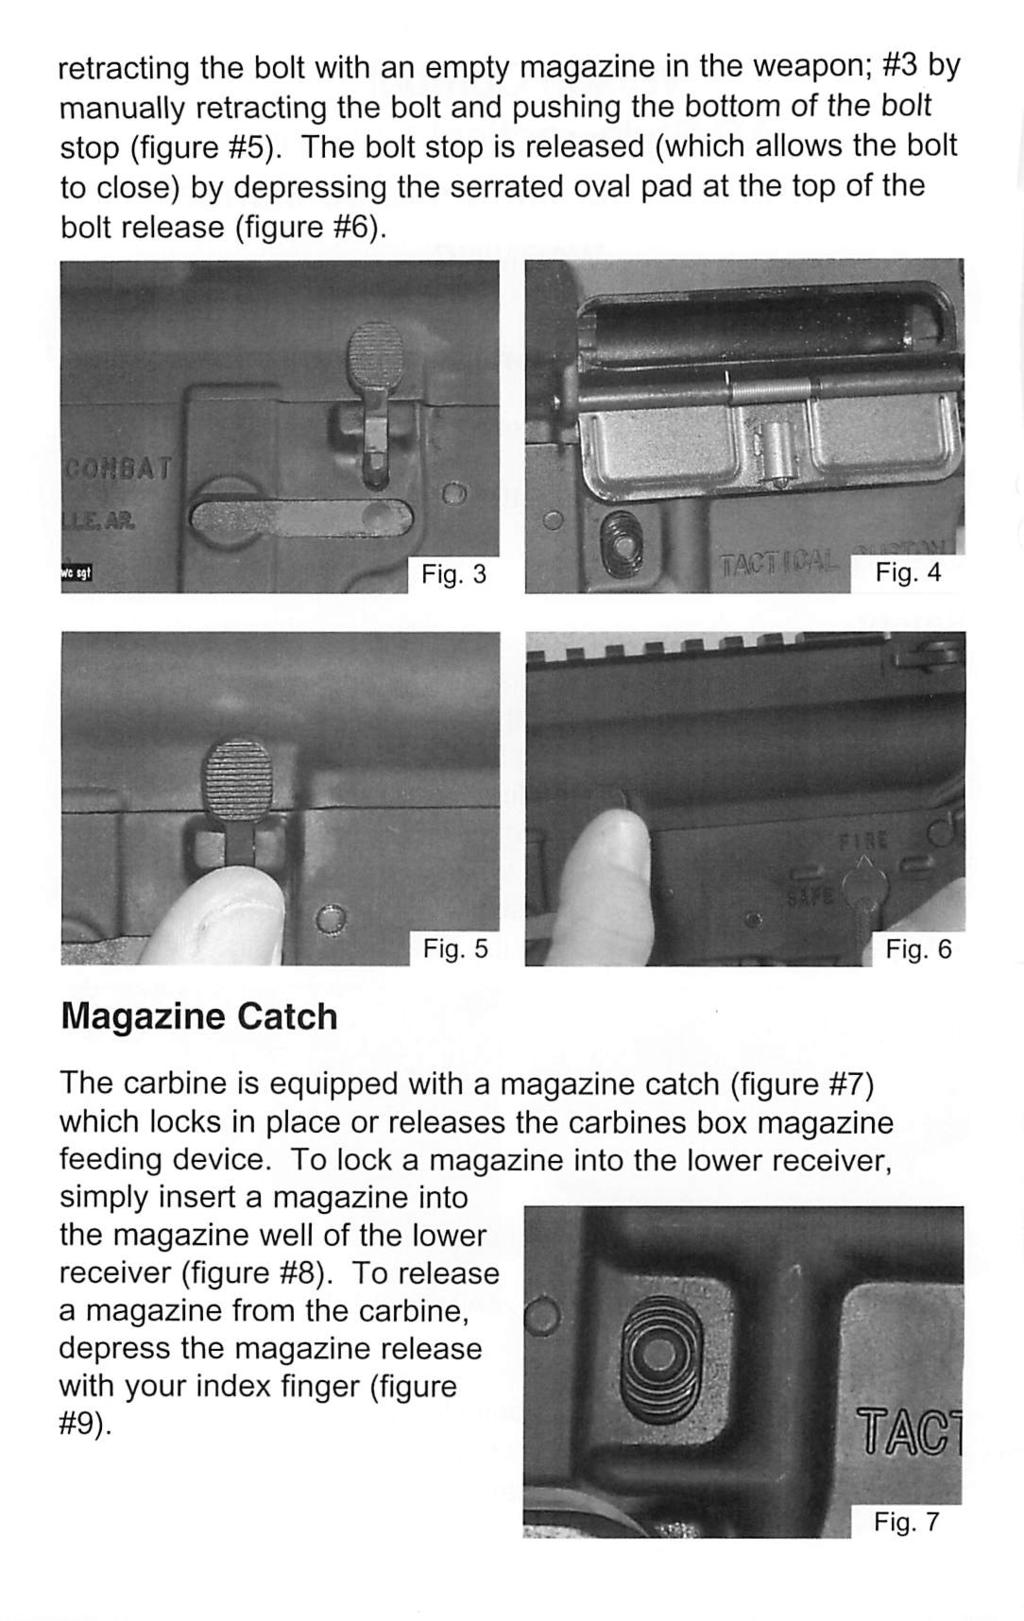 retracting the bolt with an empty magazine in the weapon; #3 by manually retracting the bolt and pushing the bottom of the bolt stop (figure #5).